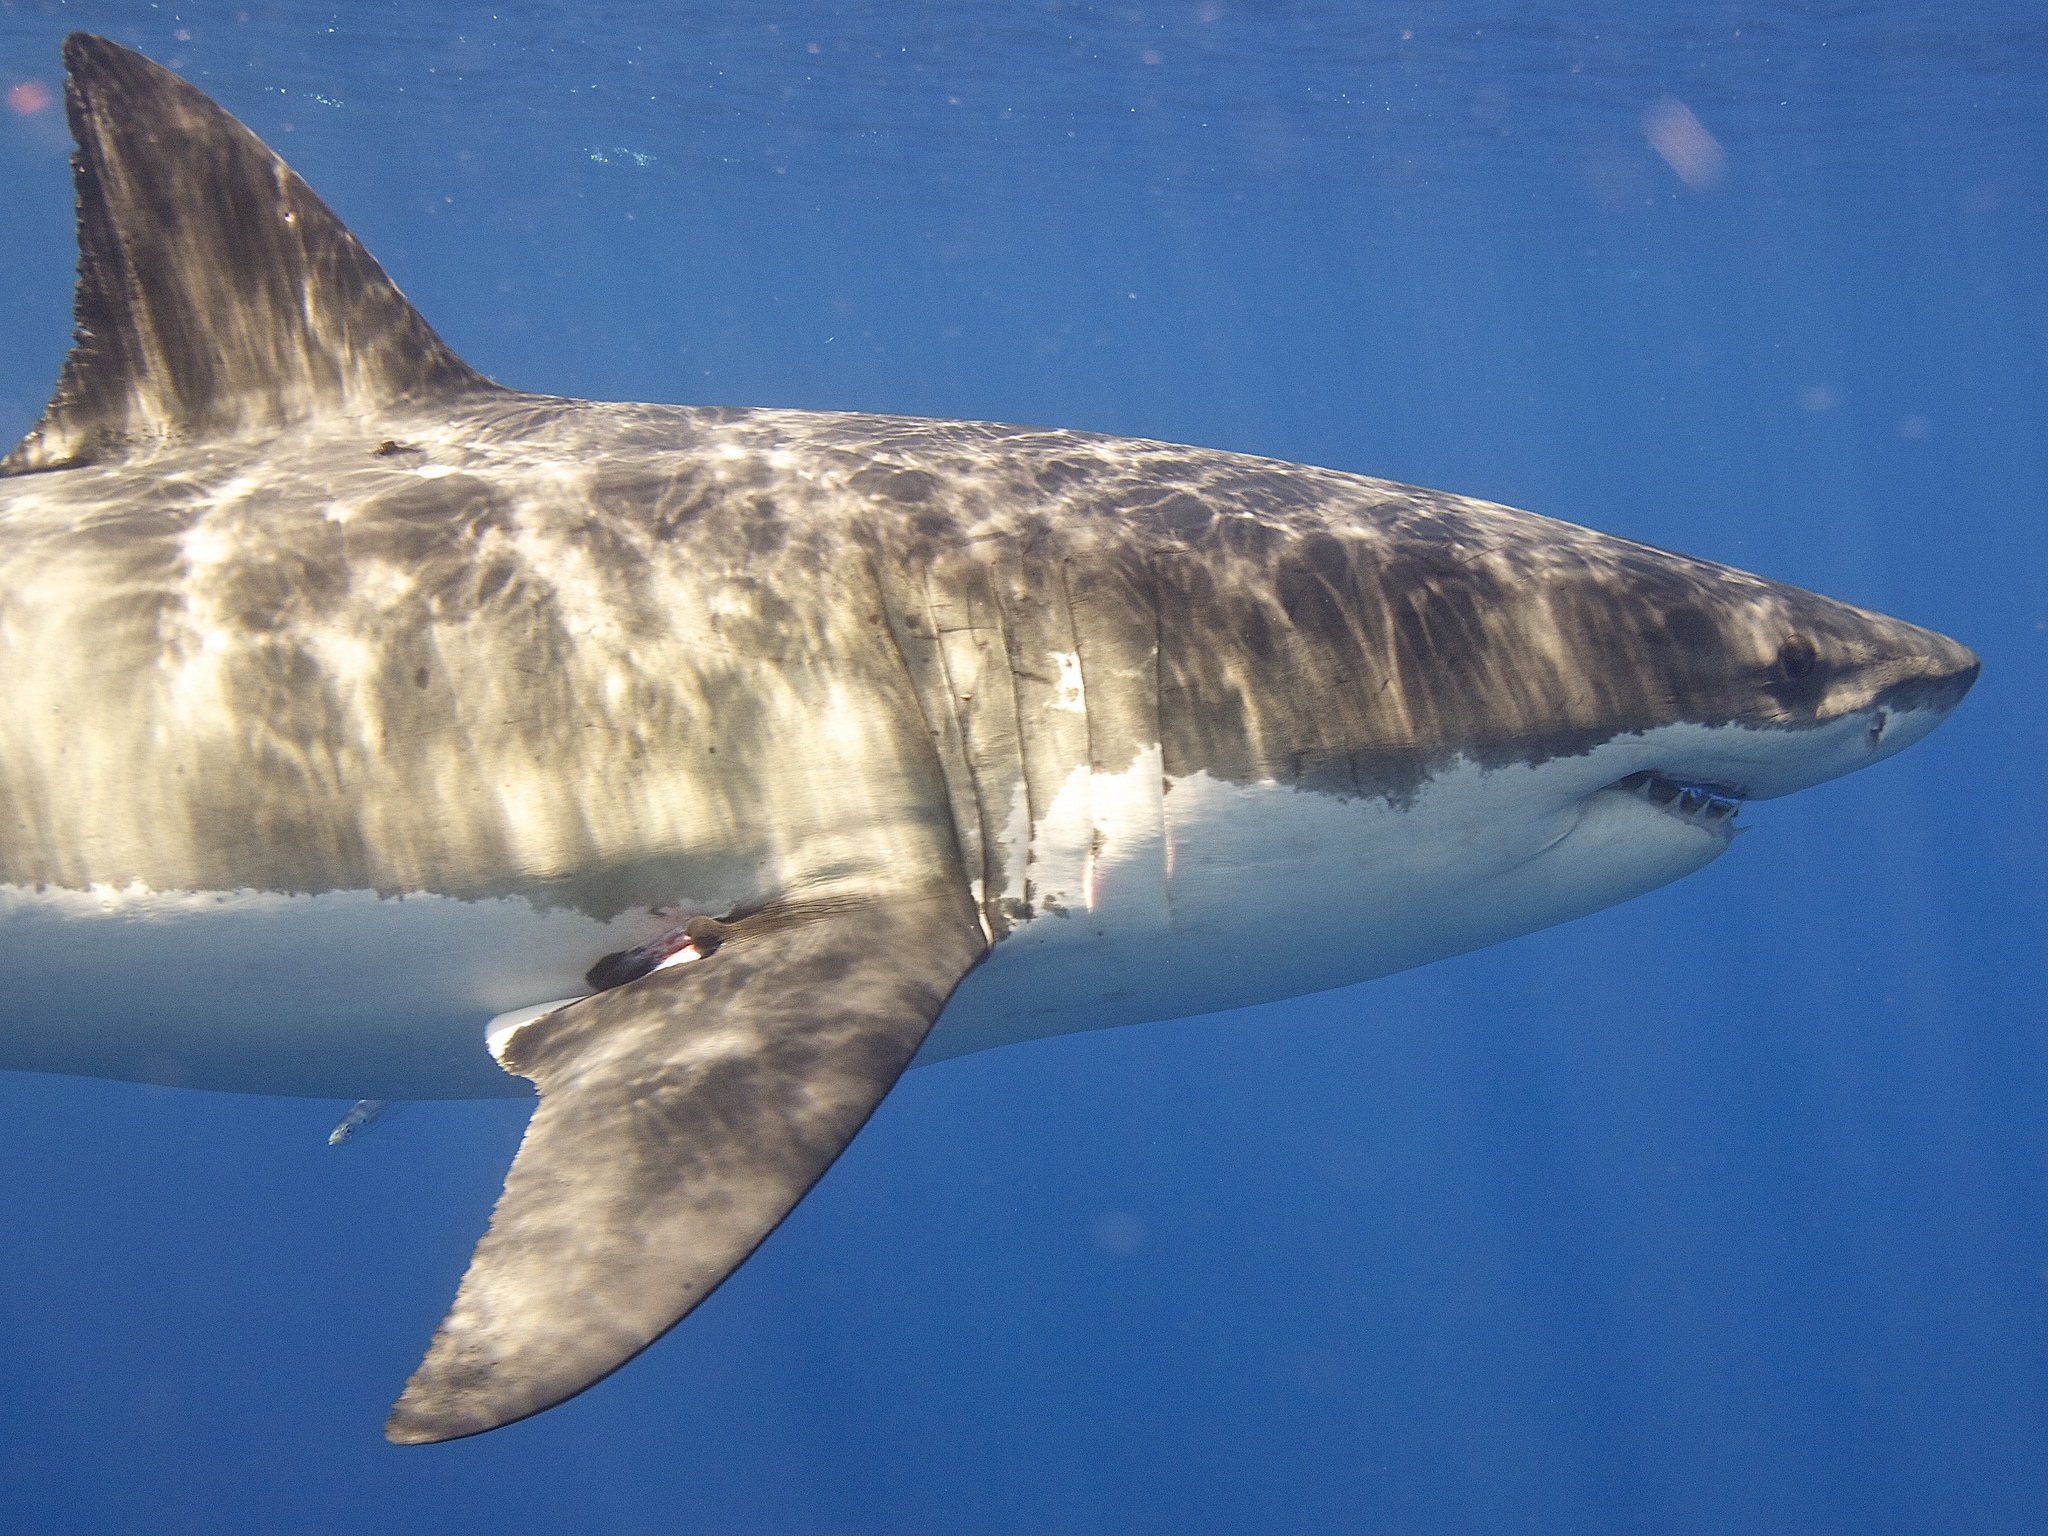 Great White Shark. Photo by Elias Levy, Flickr.